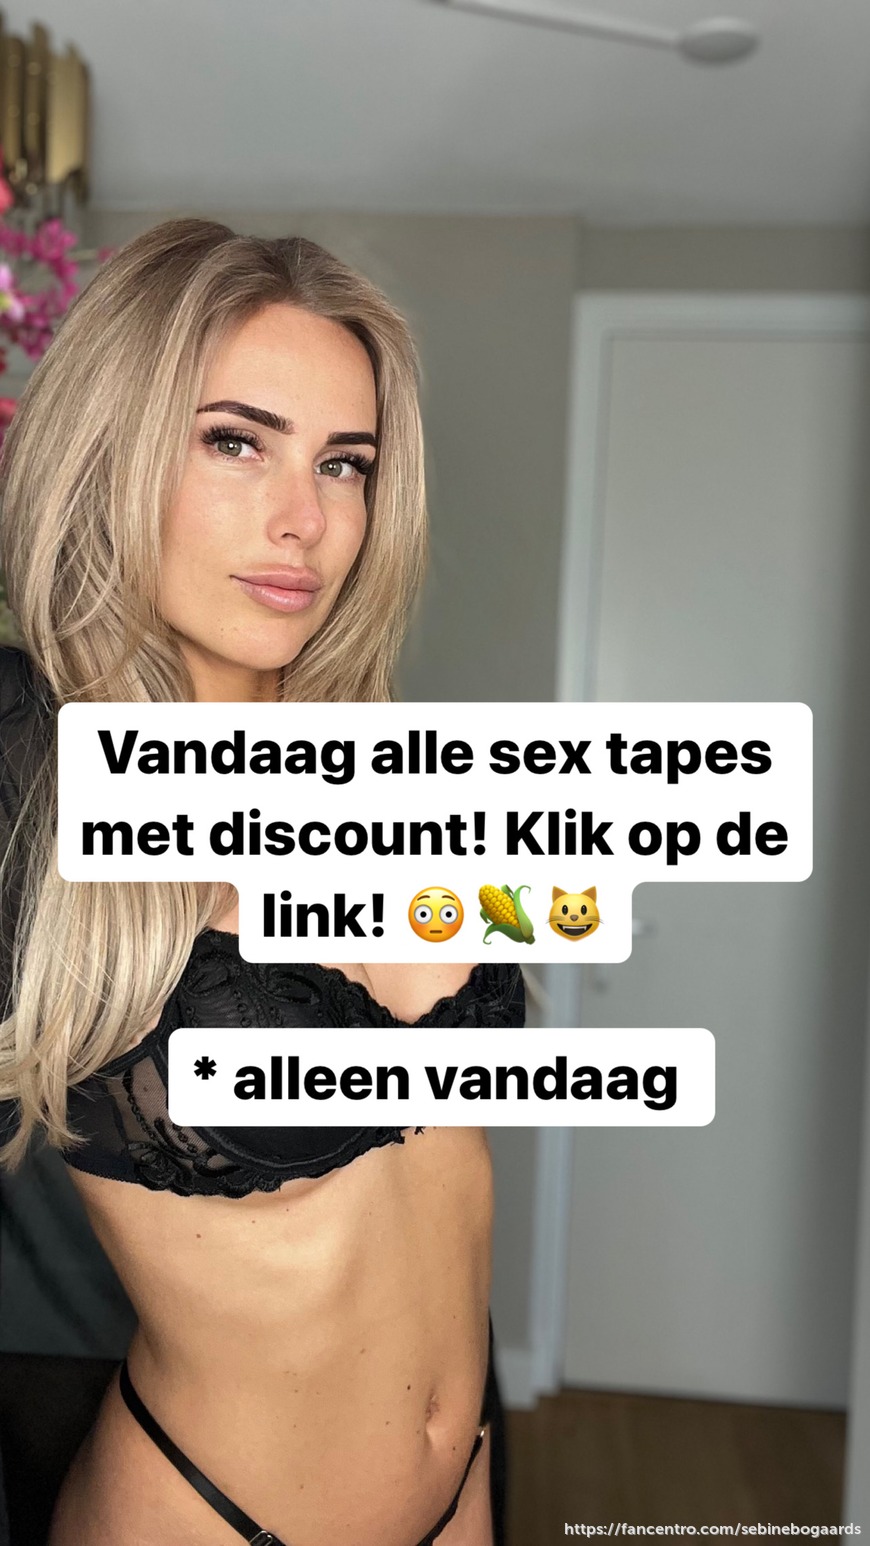 alle sex tapes 👇🏼🔗